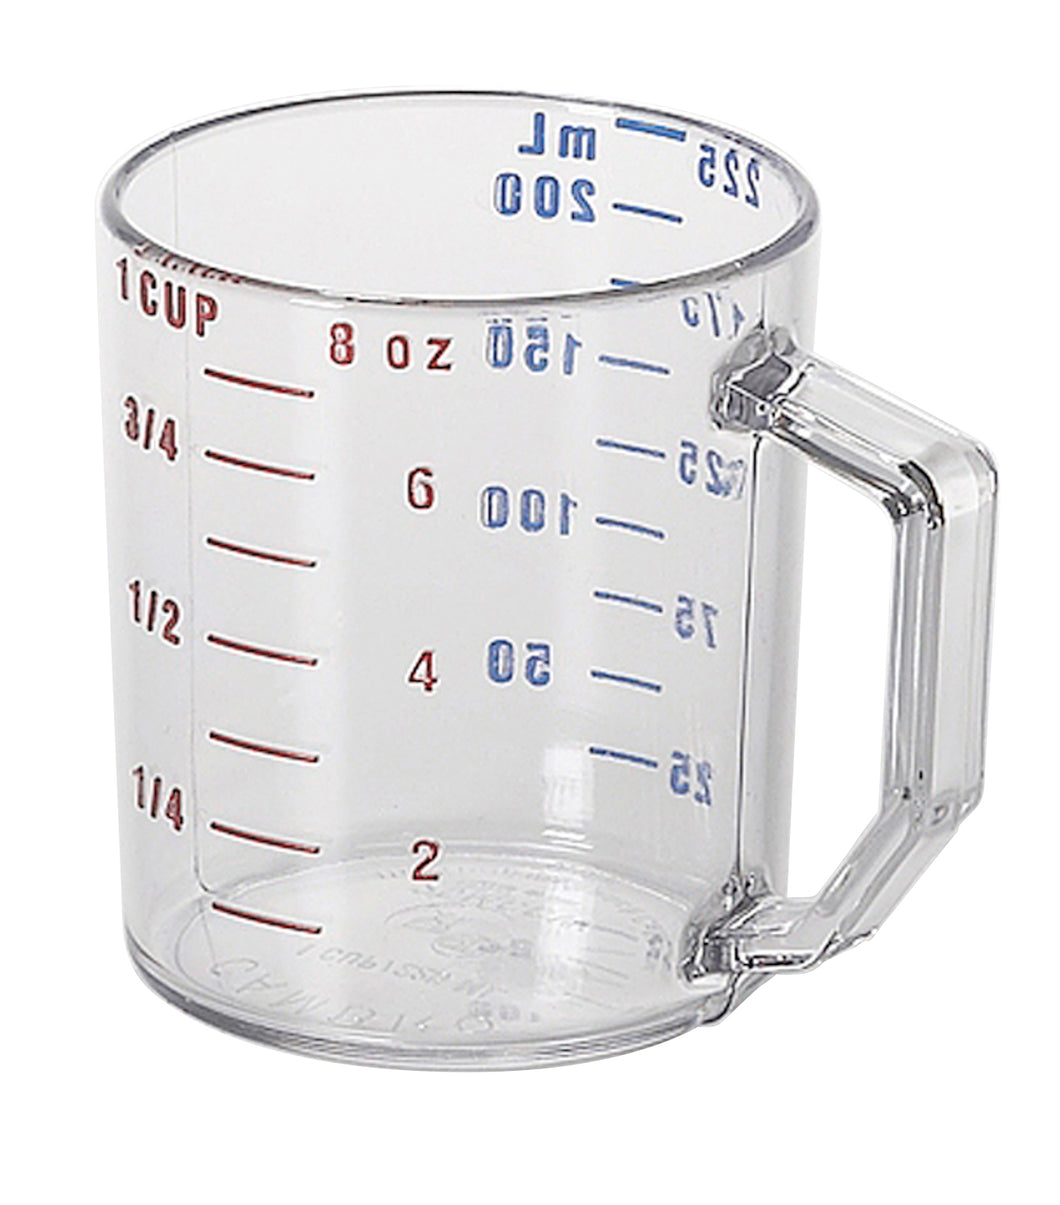 CAMBRO Measuring Cup 225ml - Clear. Sold in case packs of 12.